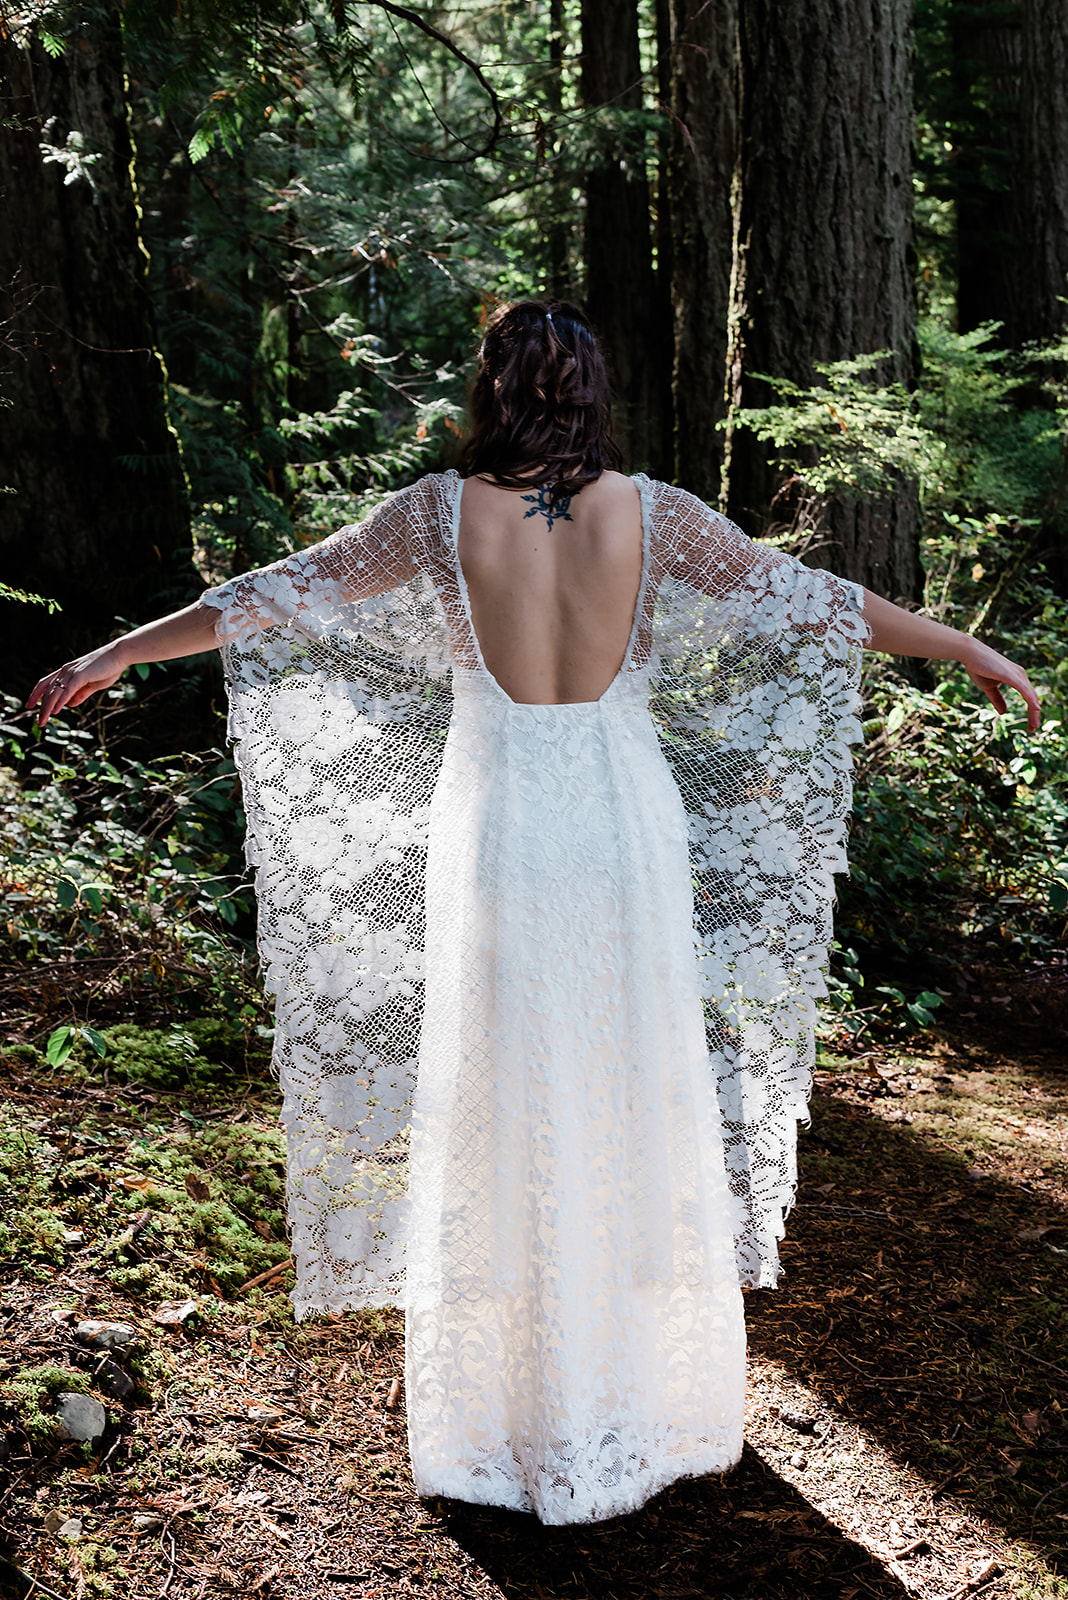 This is a picture of the bride in a forest.